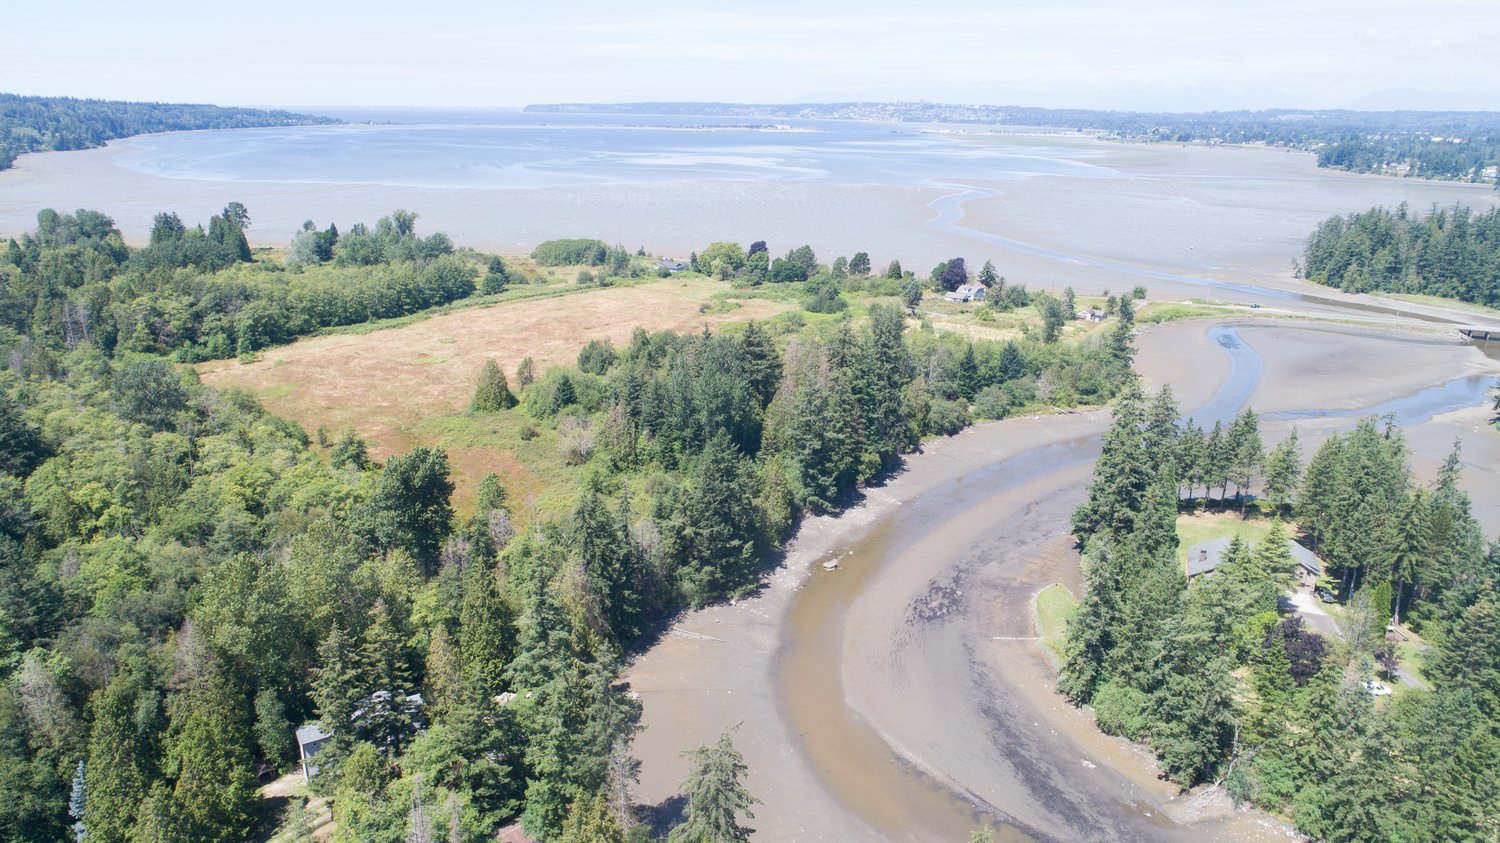 Blaine-Birch Bay Park and Recreation District 2 purchased its second piece of land from Whatcom Land Trust for the California Creek Estuary Park. The 24-acre park, located near the mouth of California Creek, will offer habitat conservation, trail access and a kayak launch.